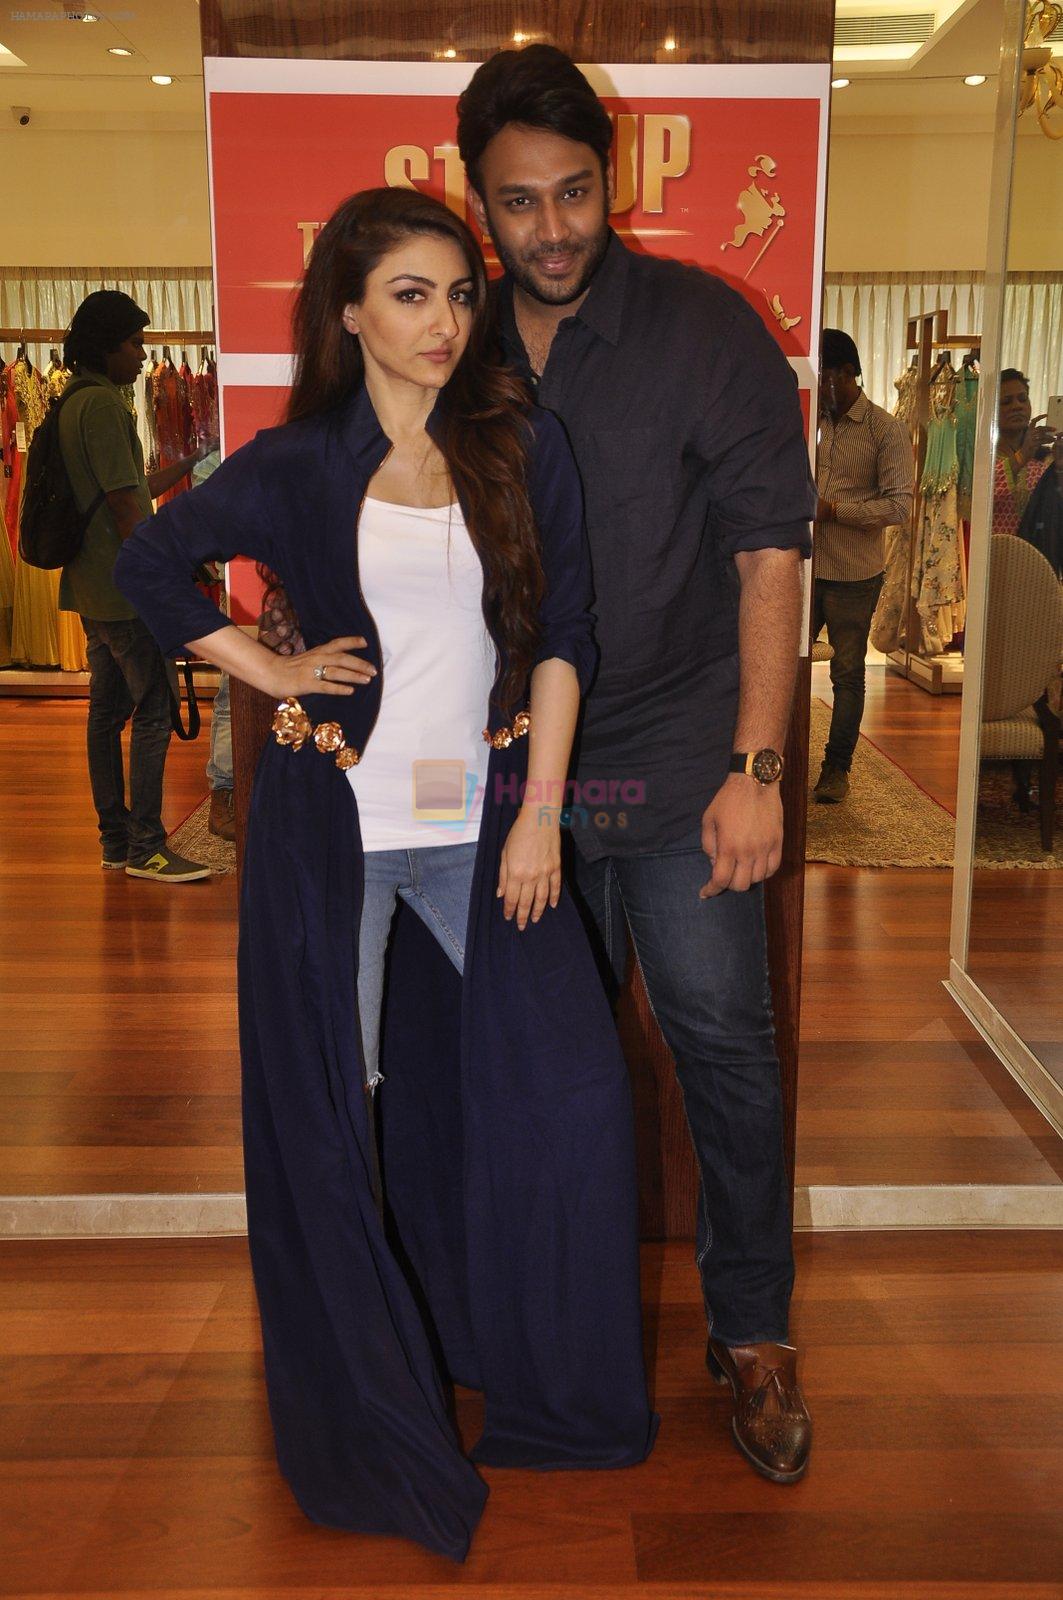 Soha Ali Khan and Nikhil Thampi at Johnnie Walkers THe Step Up  event in Mumbai on 27th March 2015